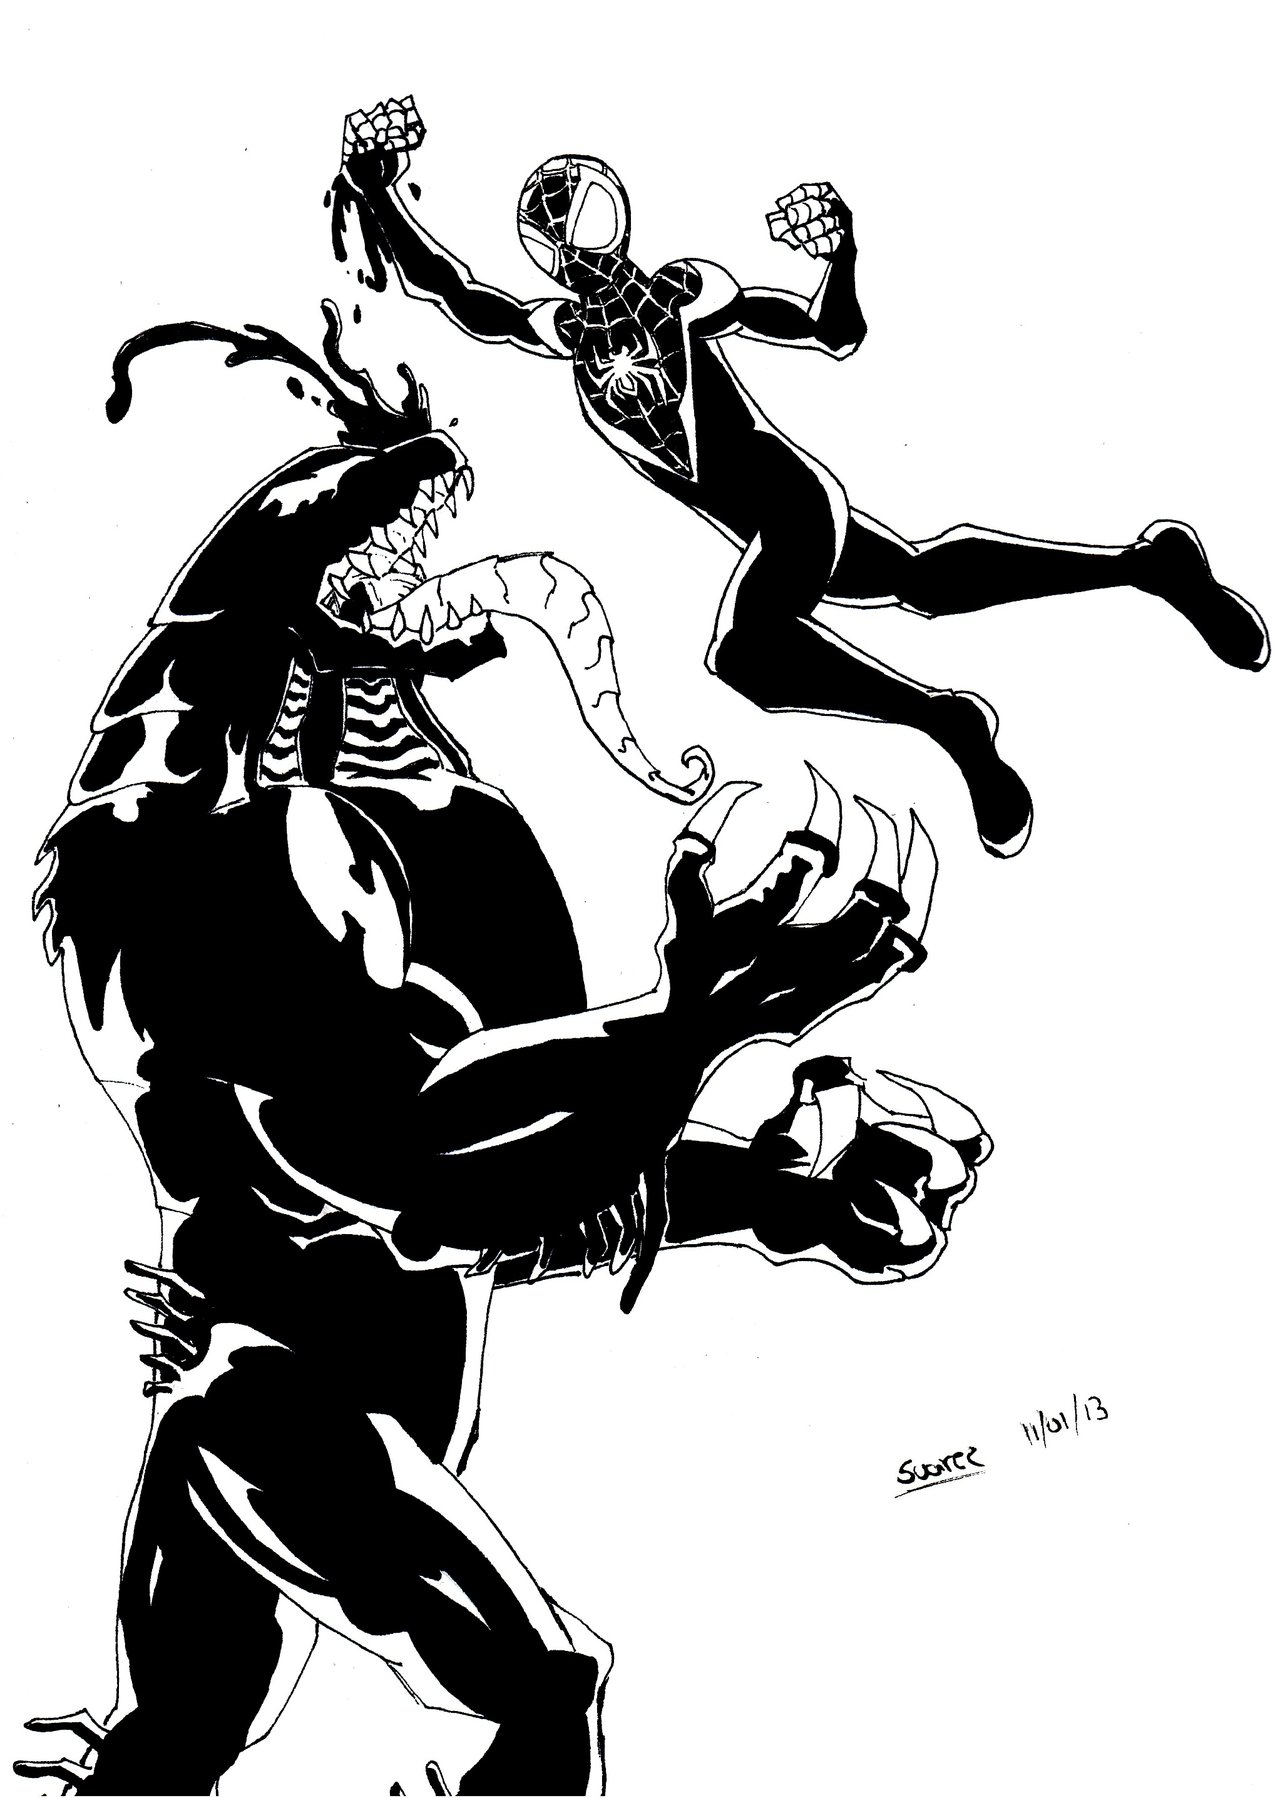 Spiderman Venom Drawing at GetDrawings.com | Free for personal use